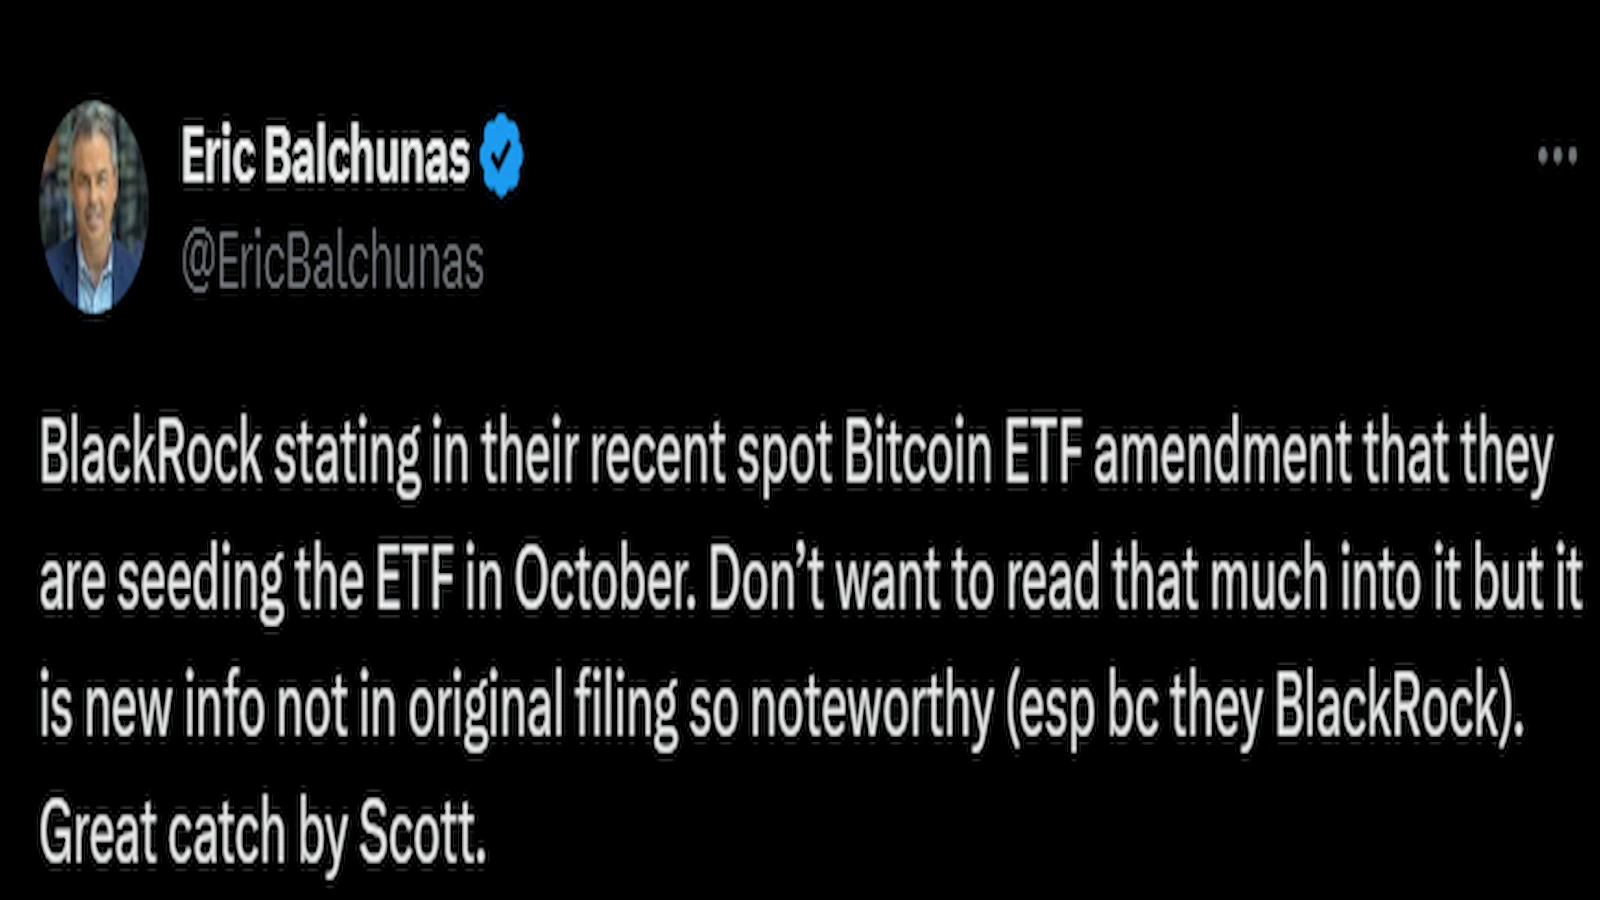 Bloomberg analyst shared that Blackrock planned to seed its Bitcoin ETF in October.